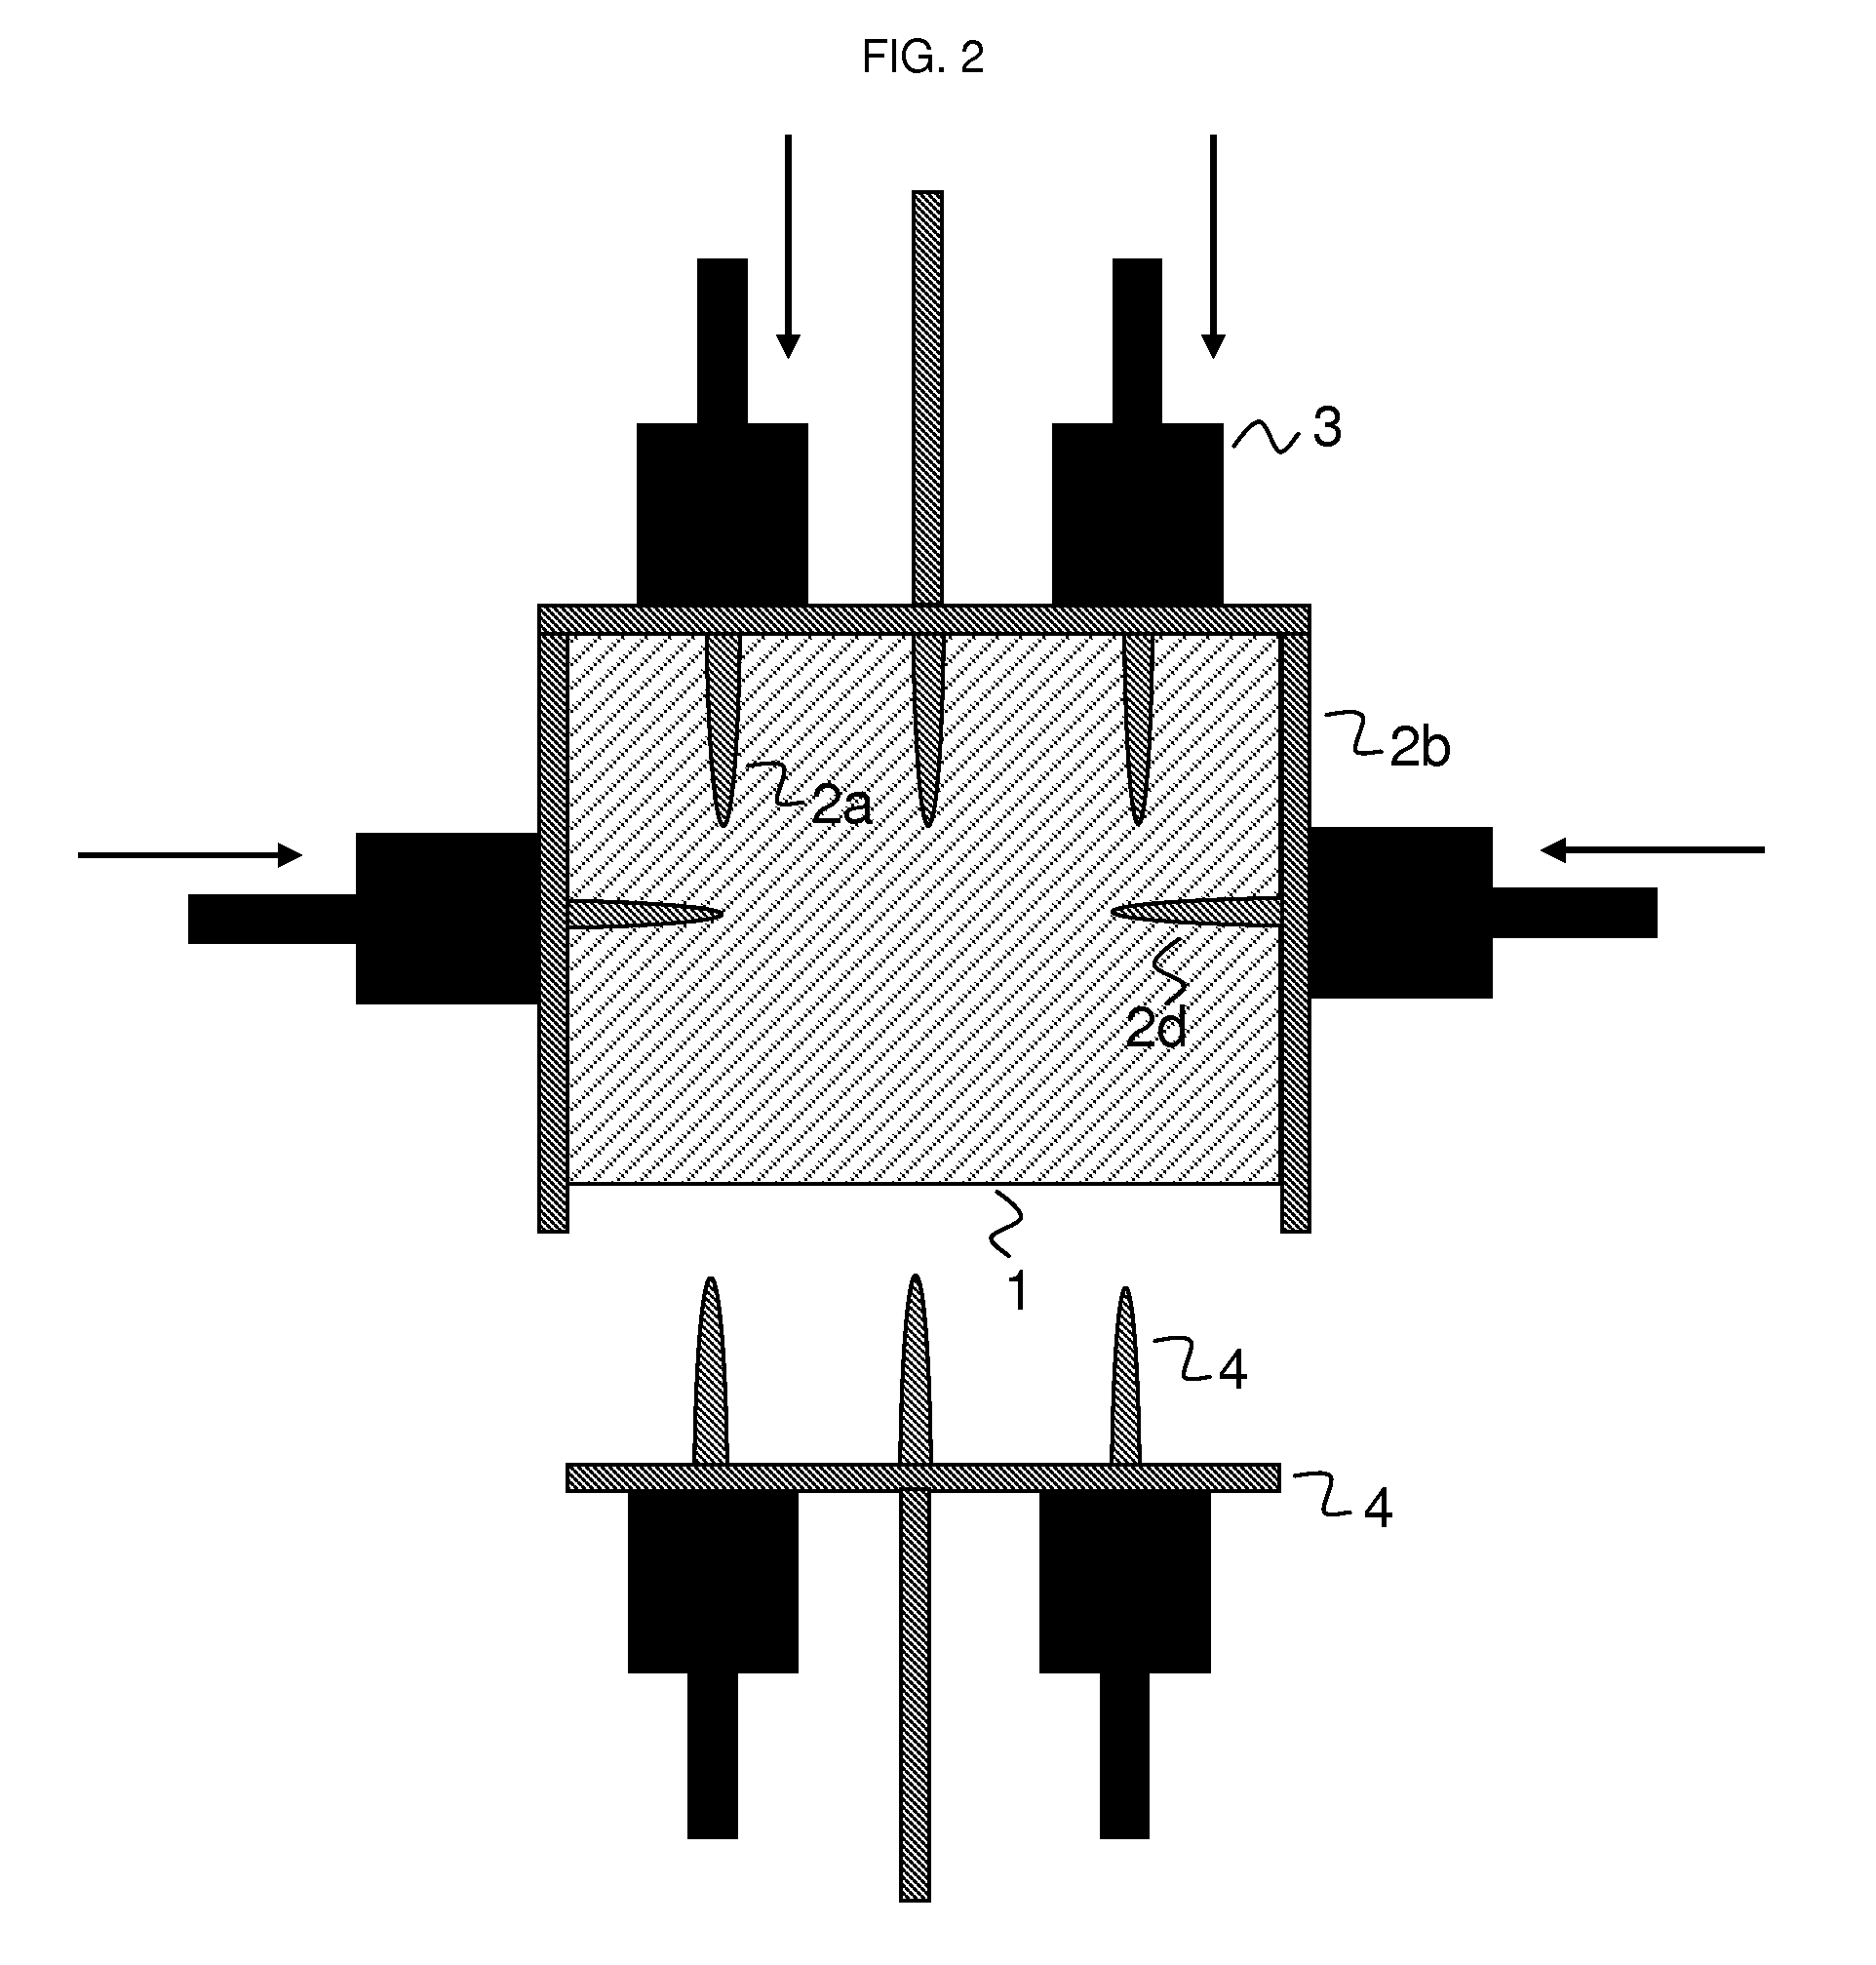 Method for producing single coal compacts suitable for coke chambers